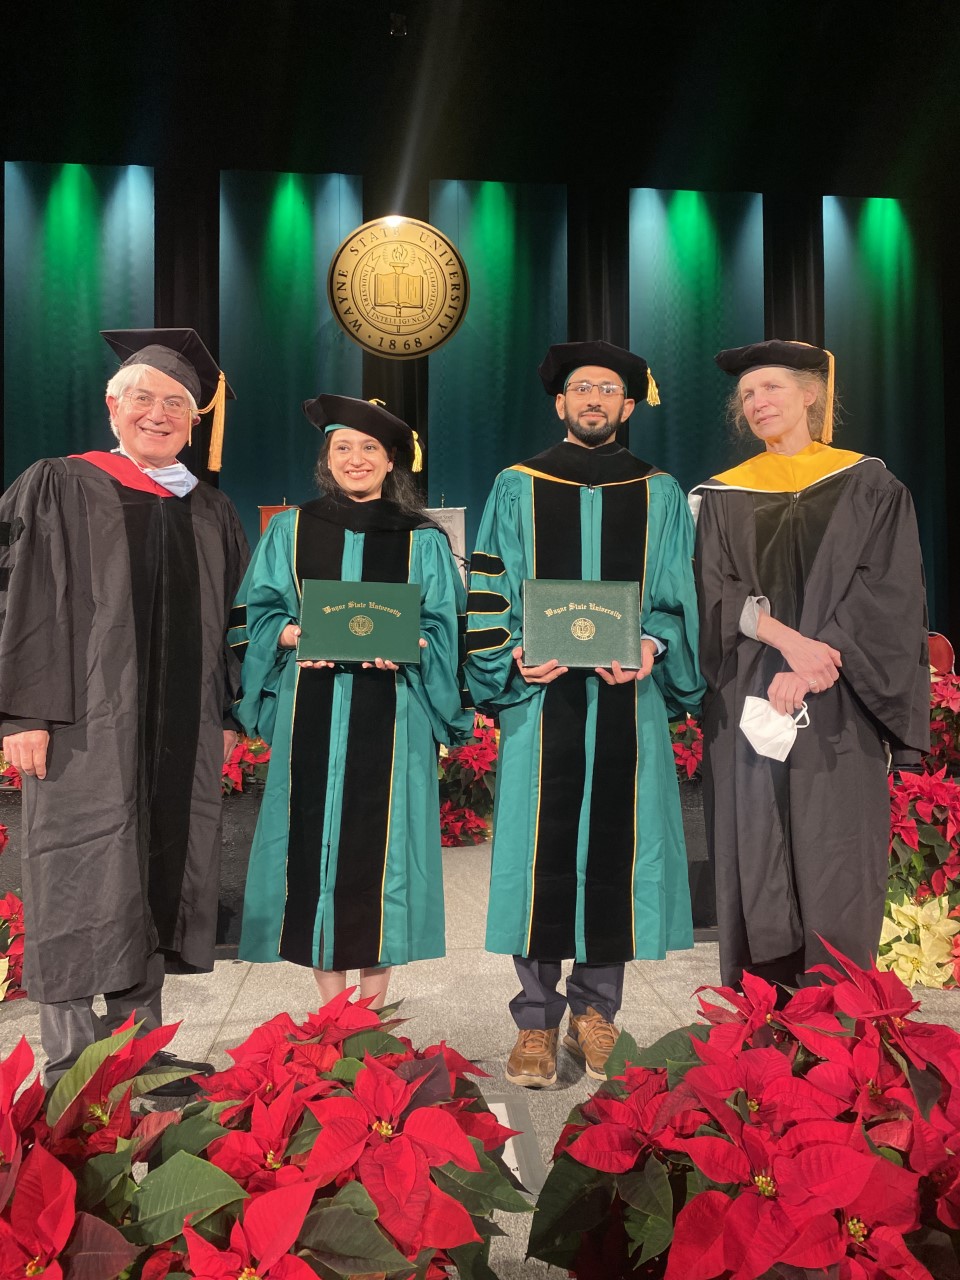 Professor David Njus and doctoral student Praneet Marwah with doctoral student Mohammed Bharmal and Professor Victoria Meller on stage